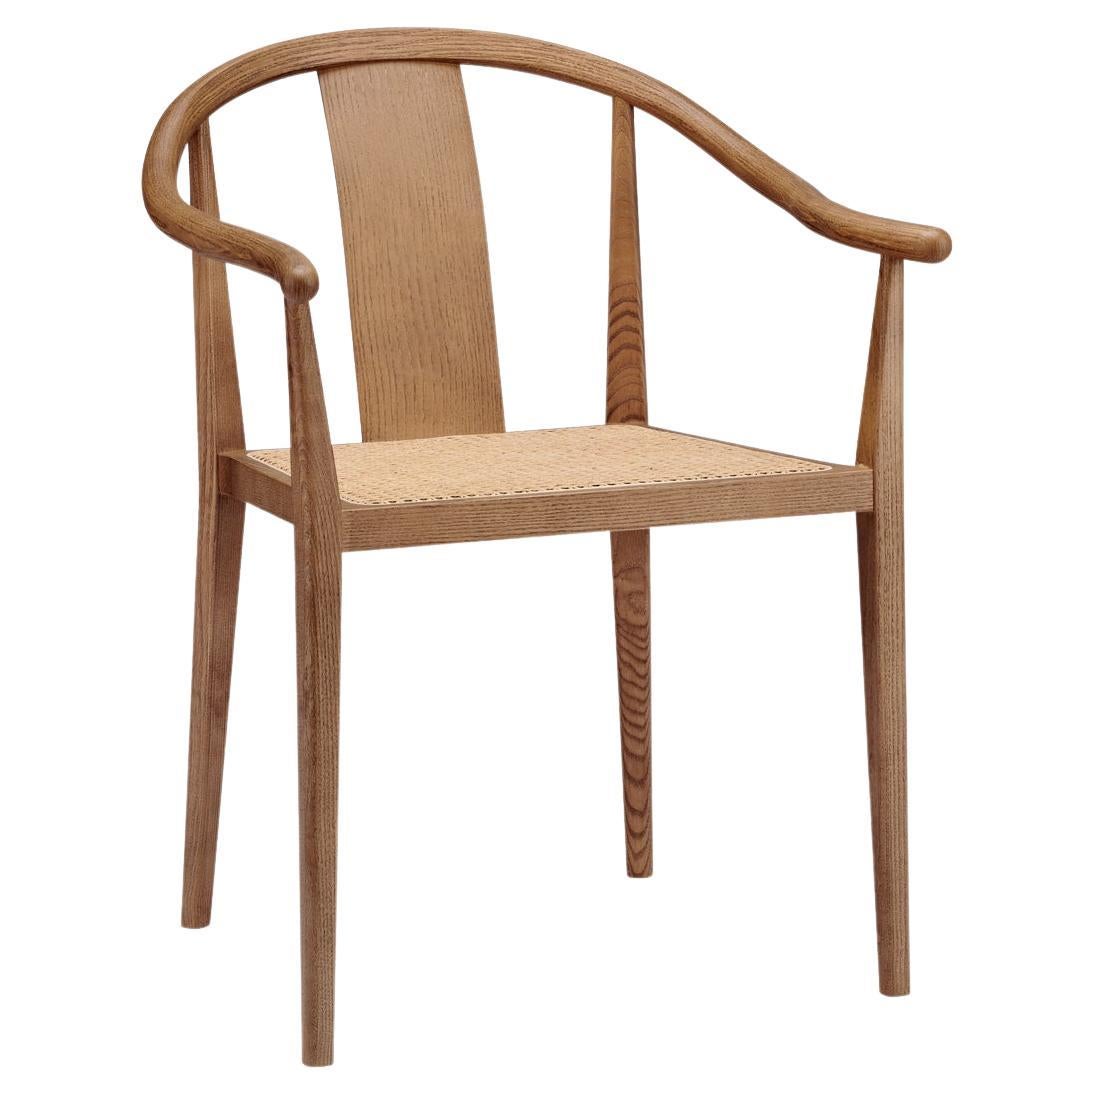 'Shanghai' Chair by Norr11, Light Smoked Oak, Natural Rattan